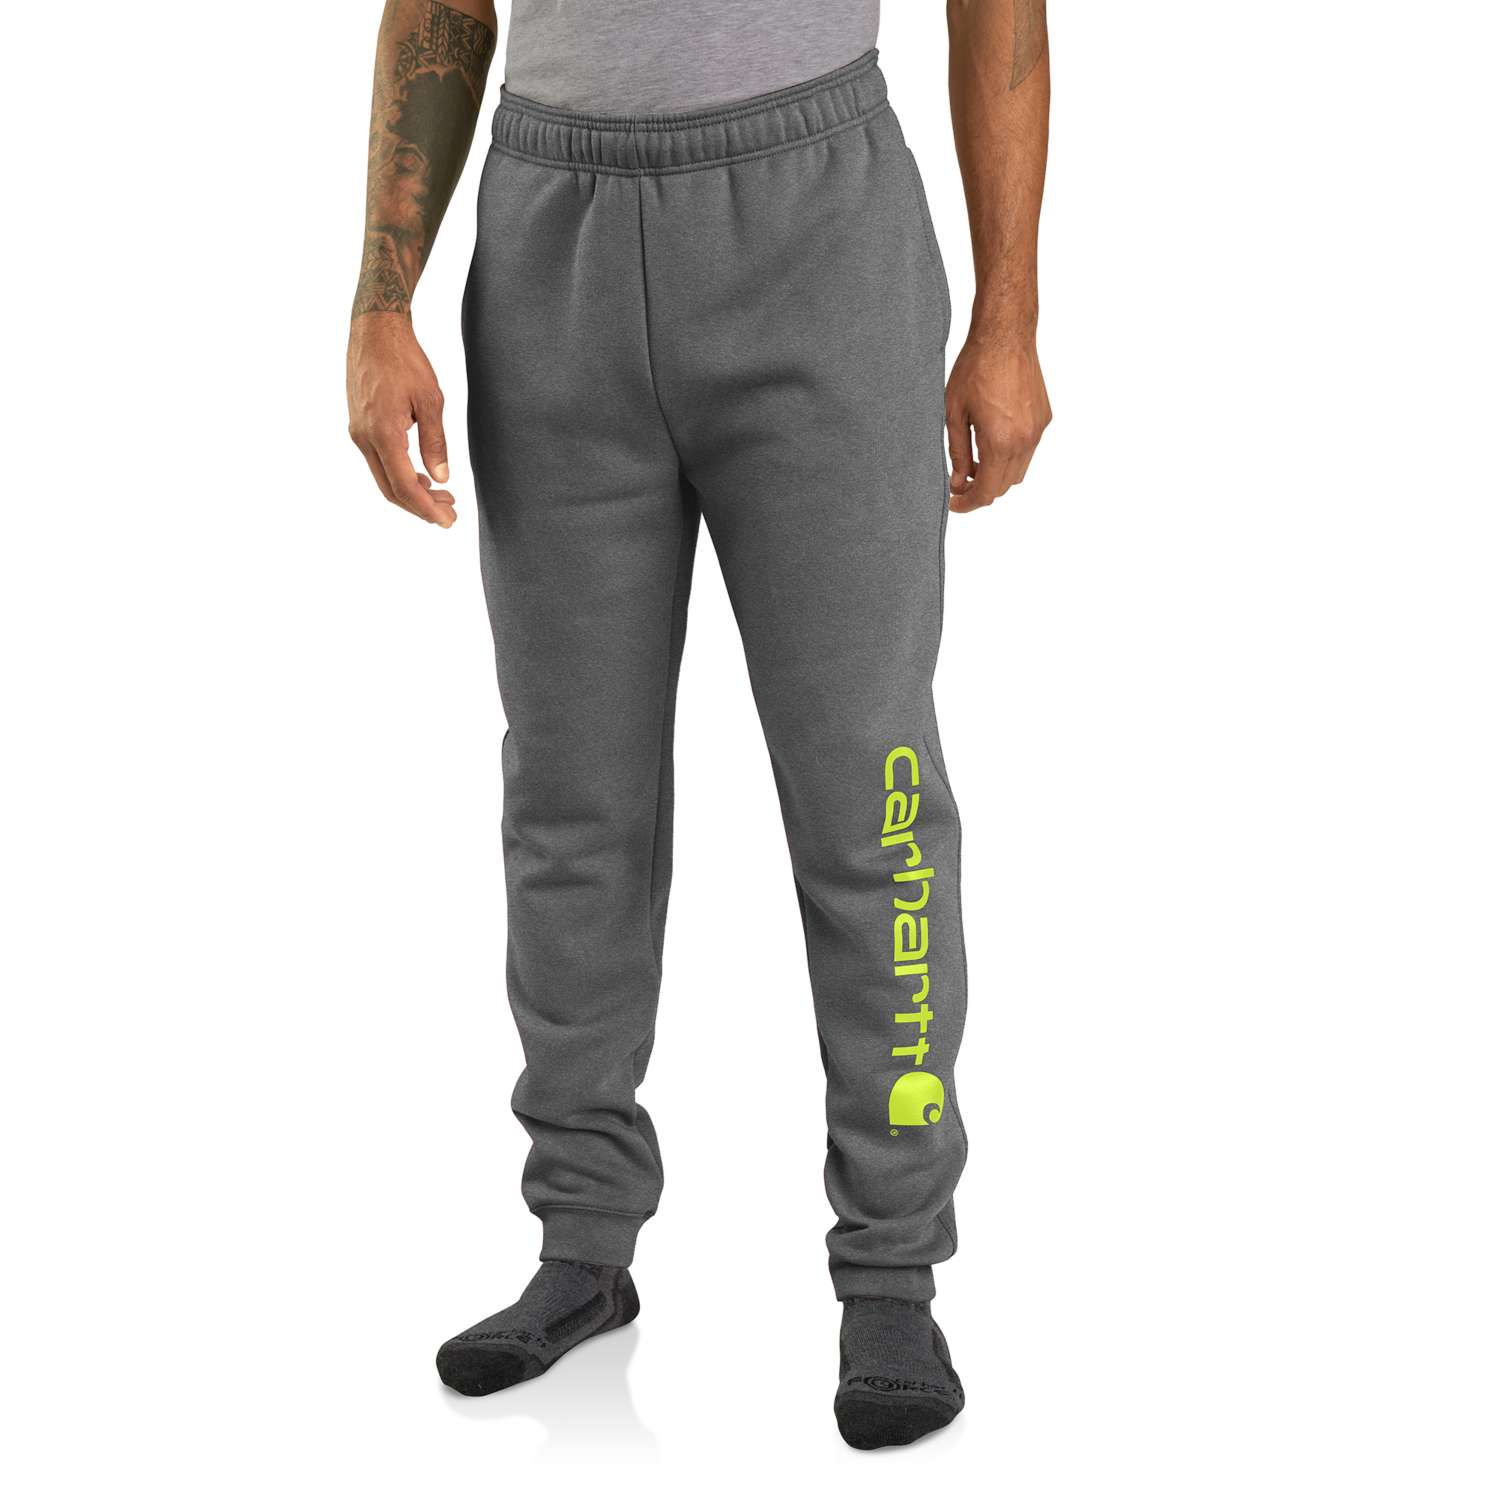 MIDWEIGHT_TAPERED_GRAPHIC_SWEATPANT_wtCI77h6iR